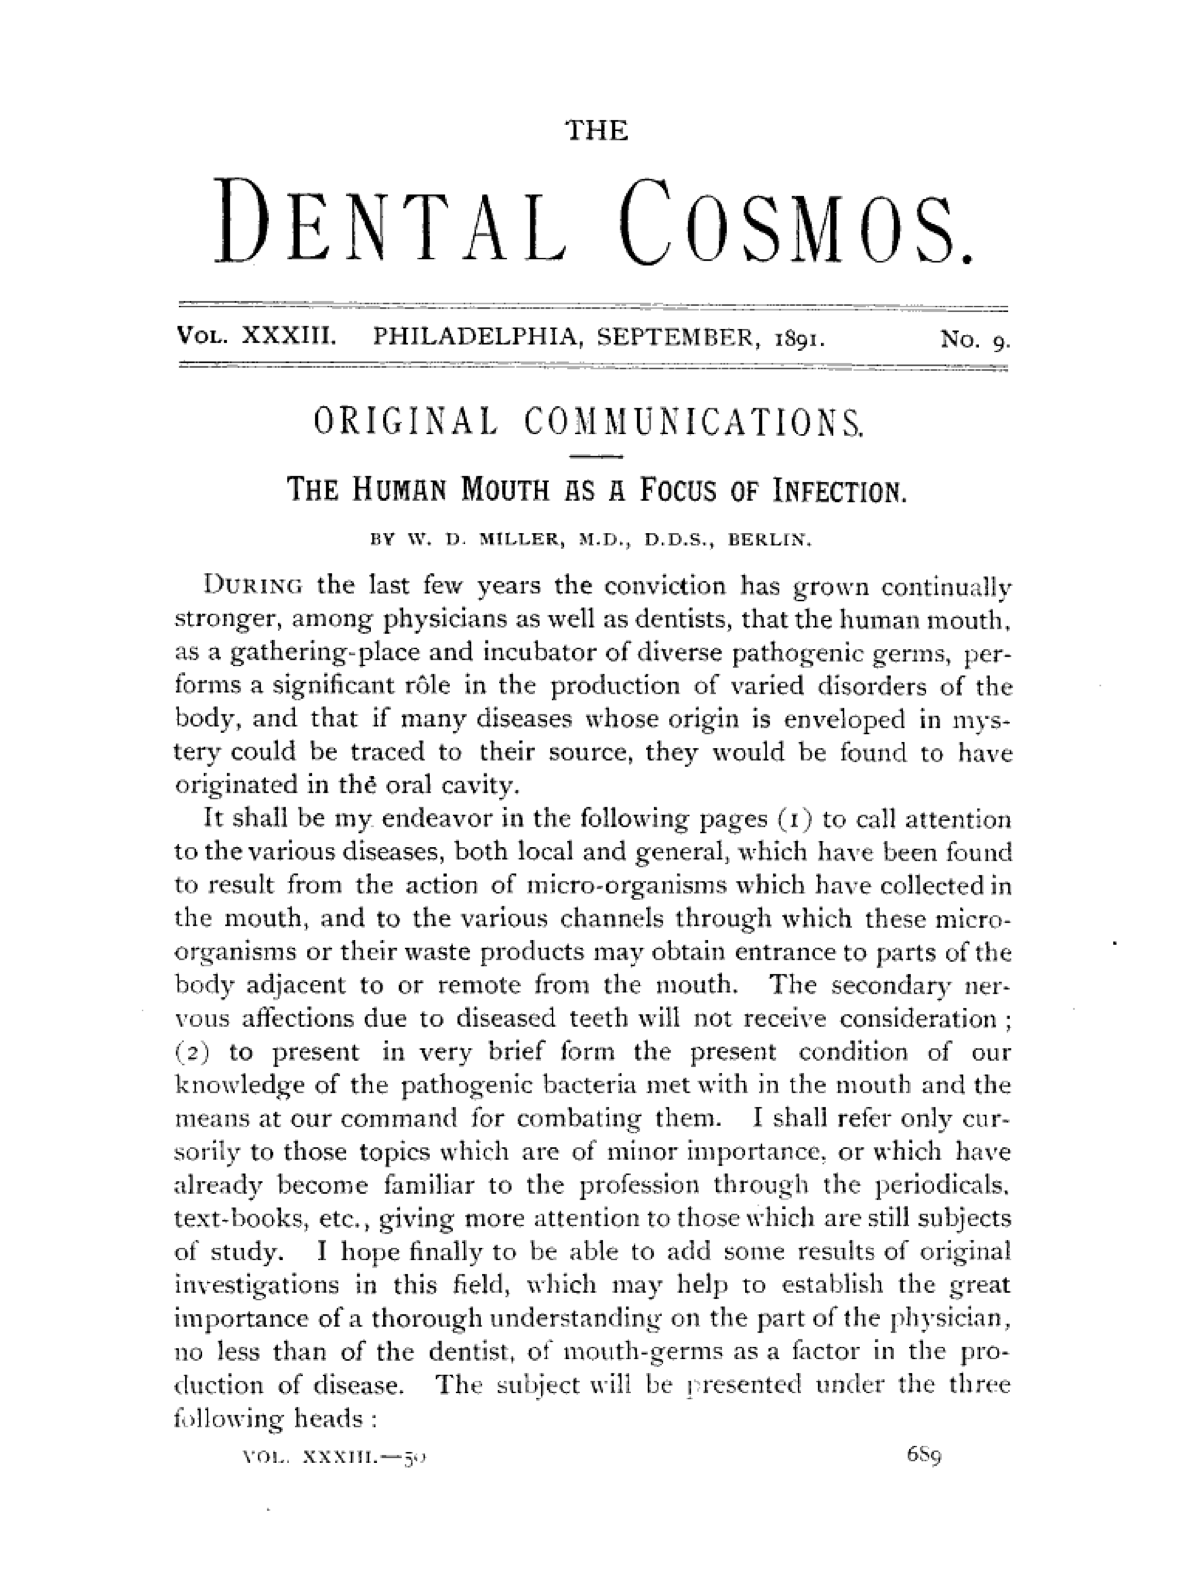 W.D. Miller’s “The Human Mouth as a Focus of Infection”, 1891